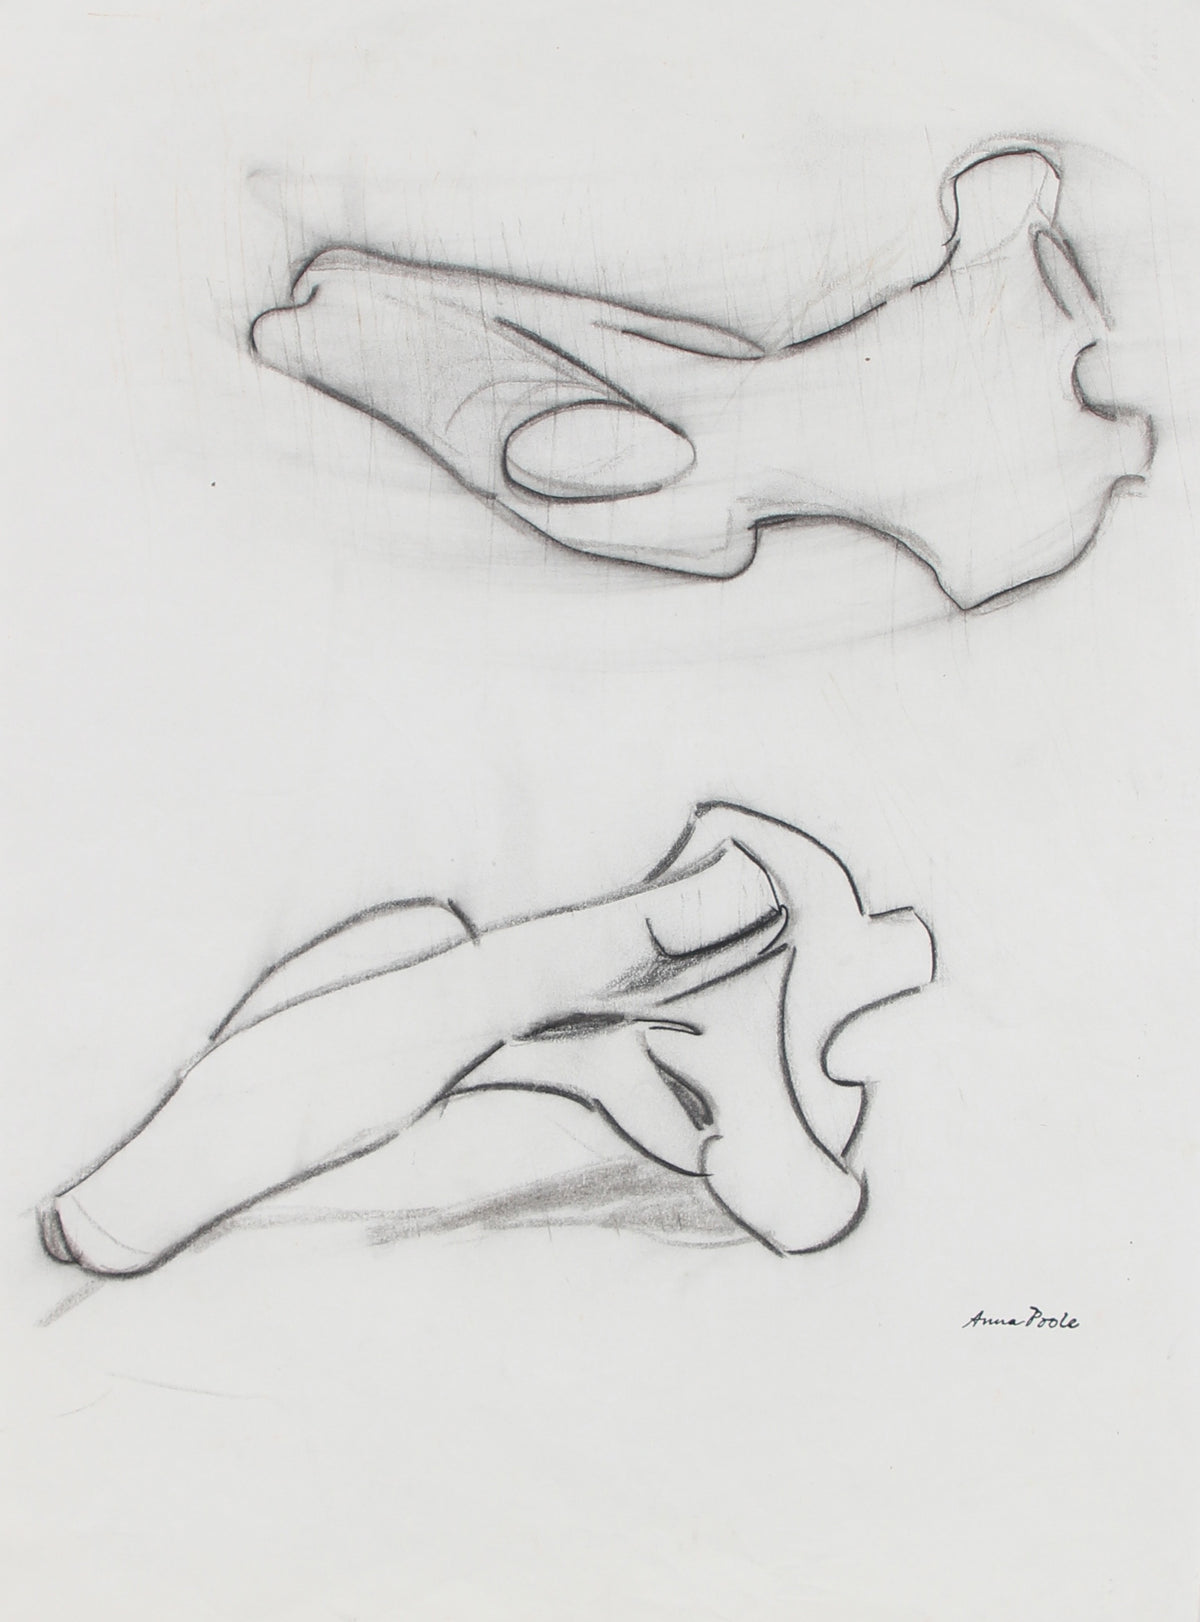 Abstracted Figure Study &lt;br&gt;Late 20th Century Charcoal &lt;br&gt;&lt;br&gt;98978